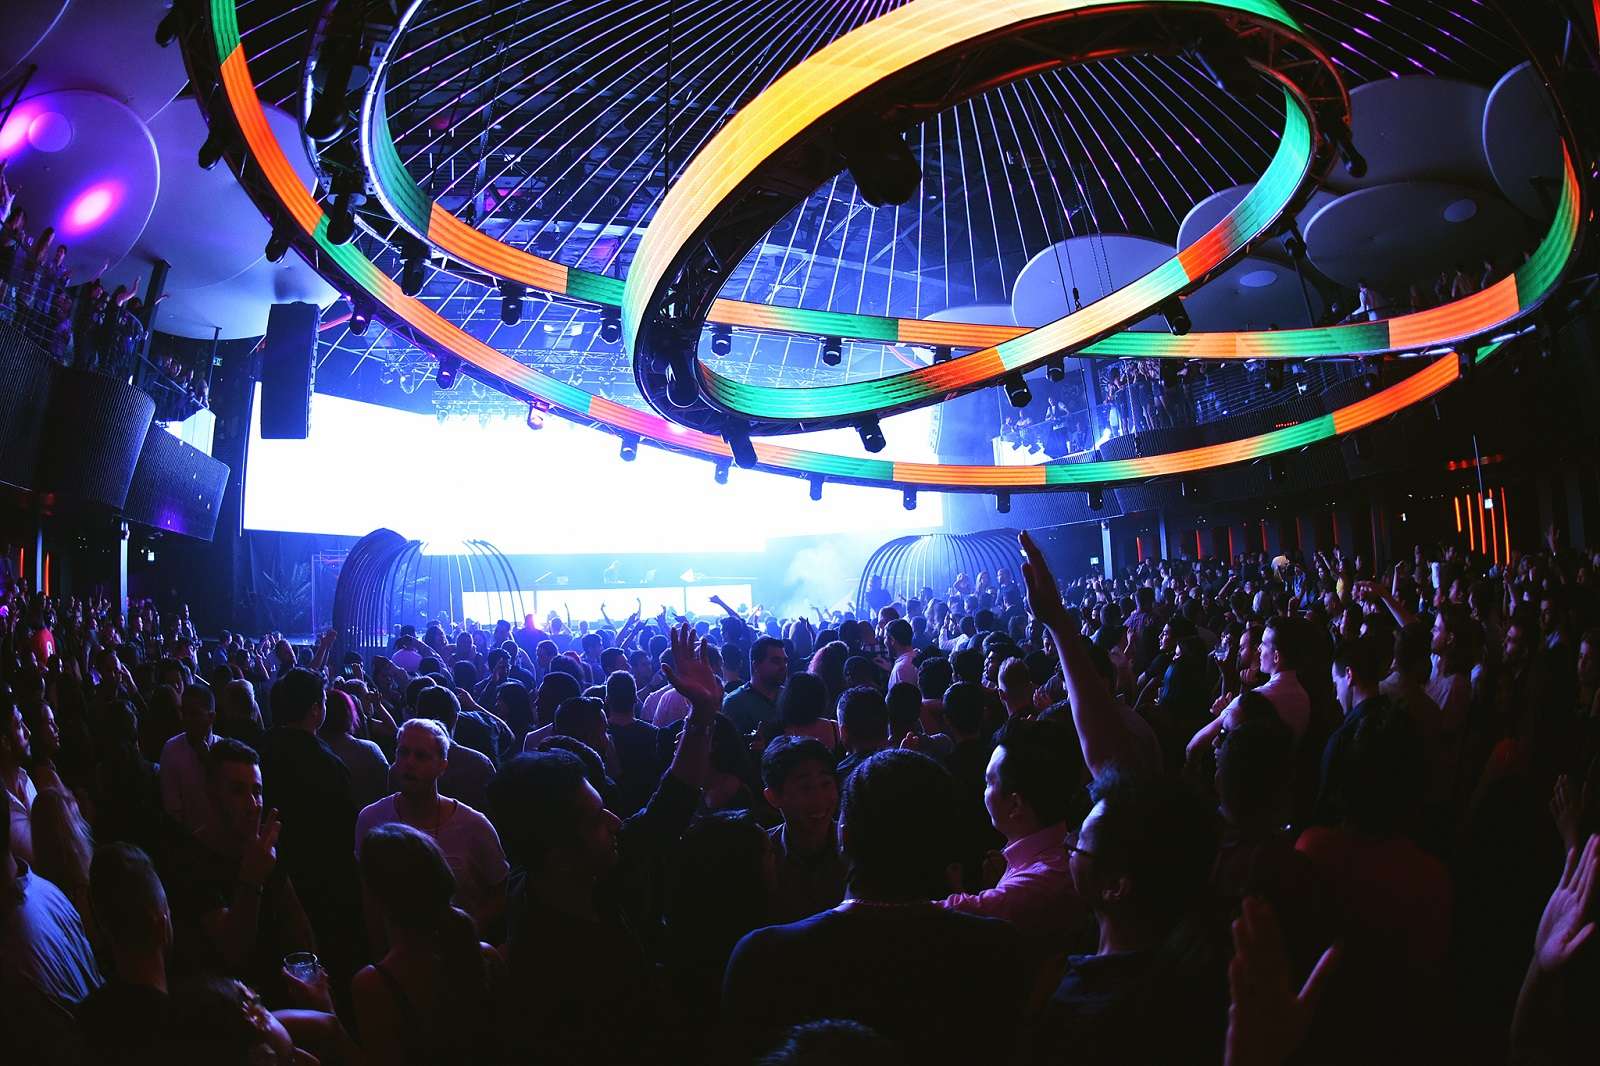 Toronto's New Rebel Nightclub Looks Absolutely Insane & So Does The